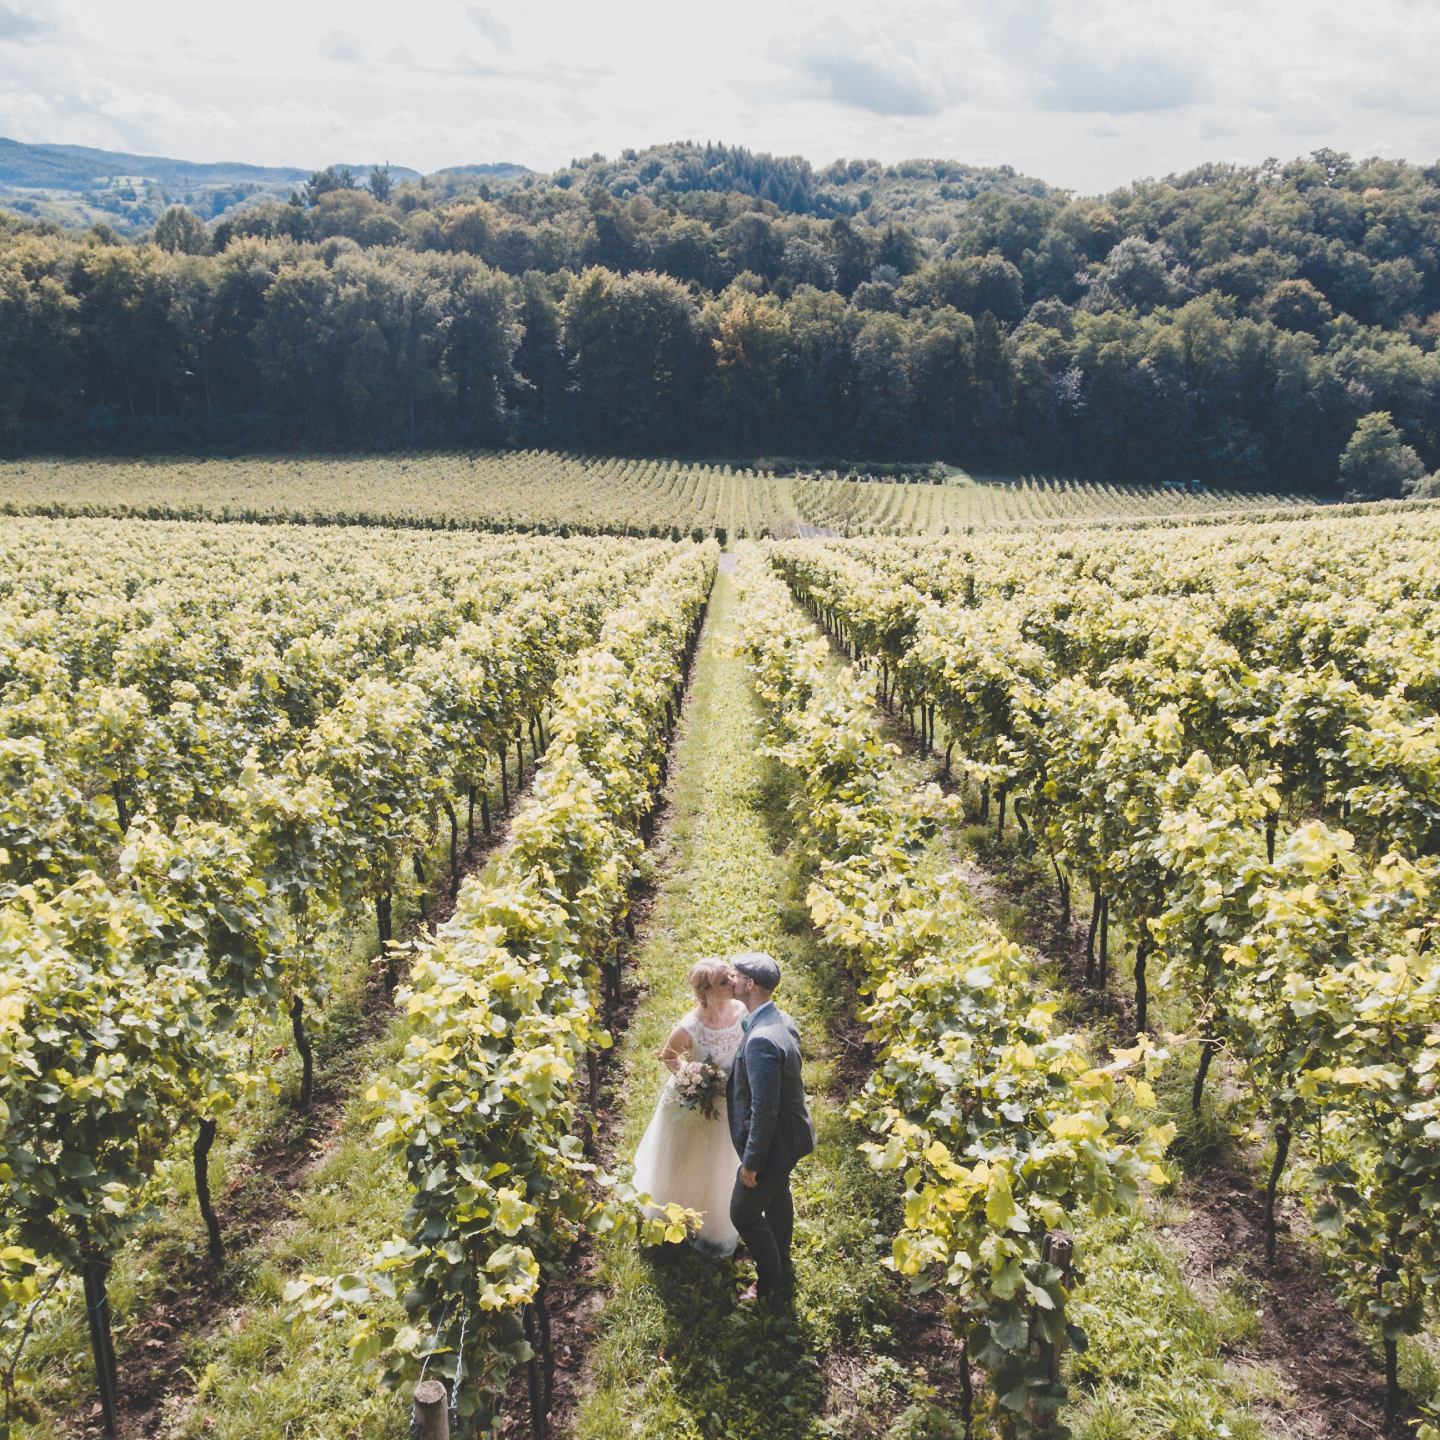 bride and groom kissing in the vineyard. Photo by marc a sporys via unsplash